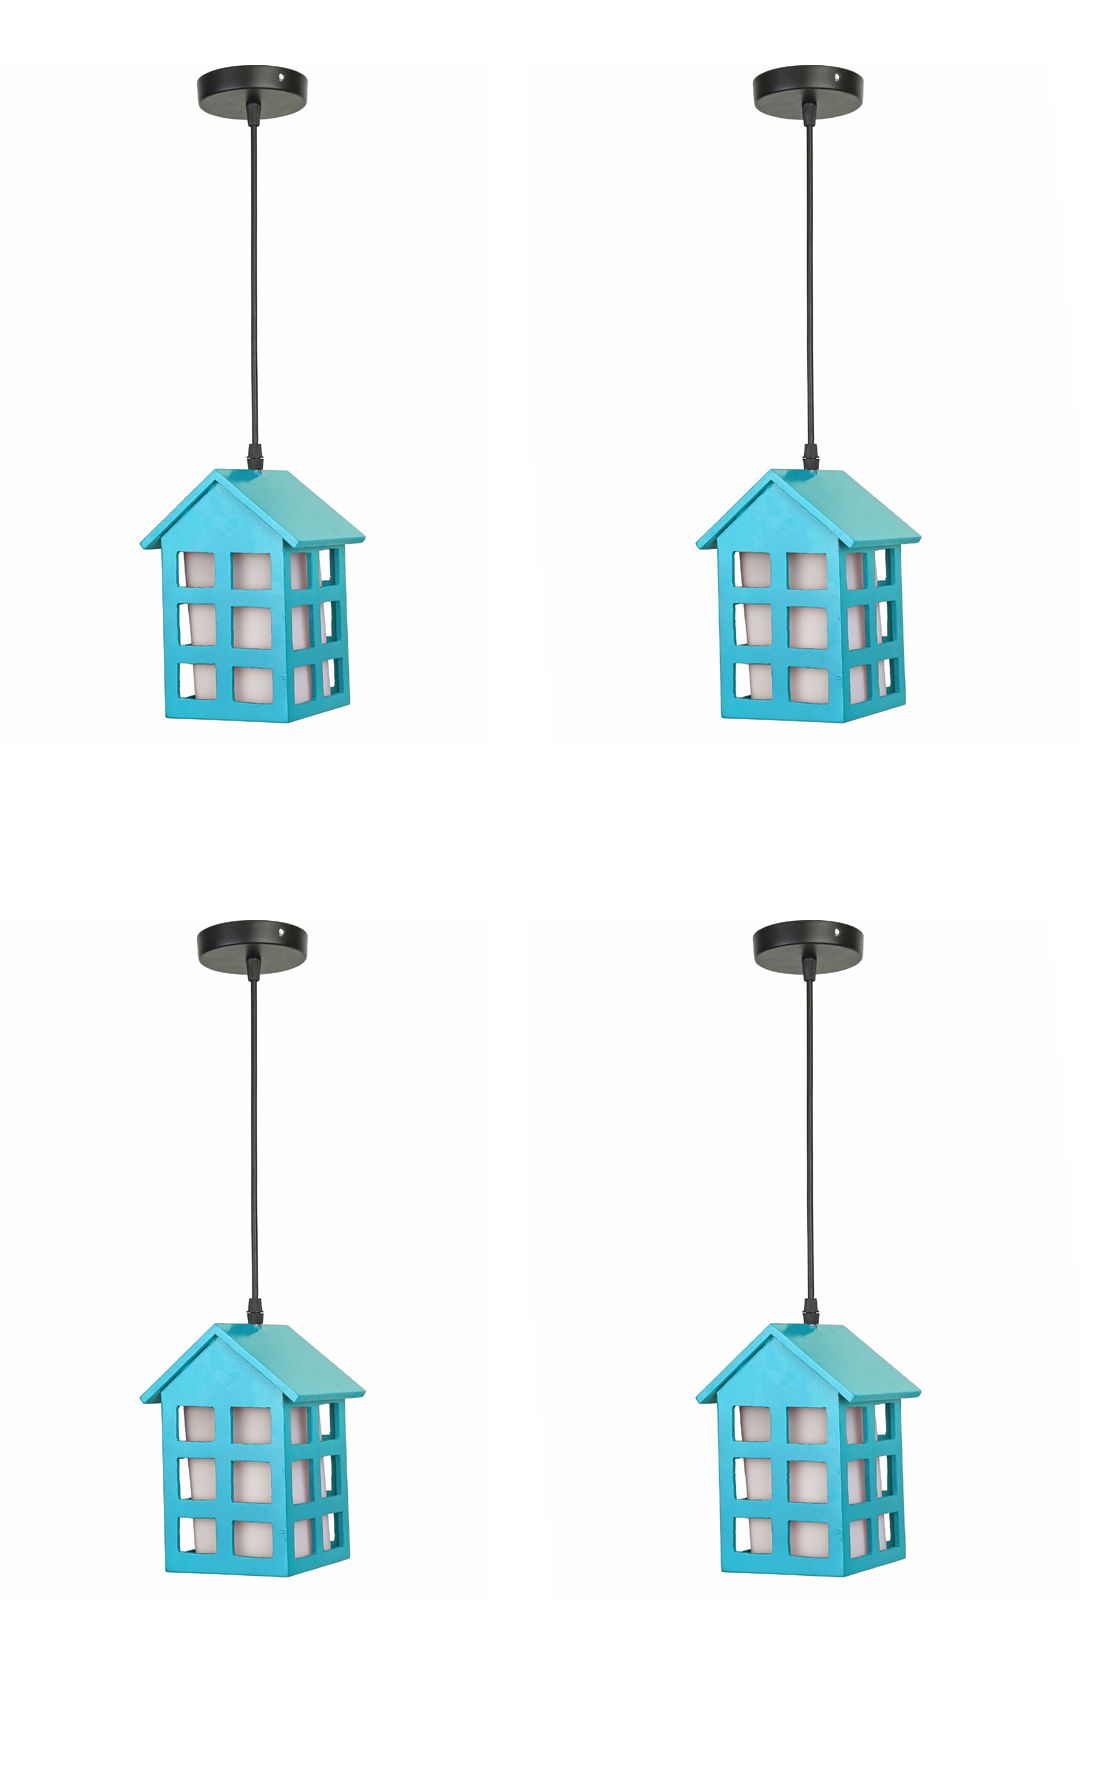     			Somil Wood Hanging Lamp Pendant Blue - Pack of 4